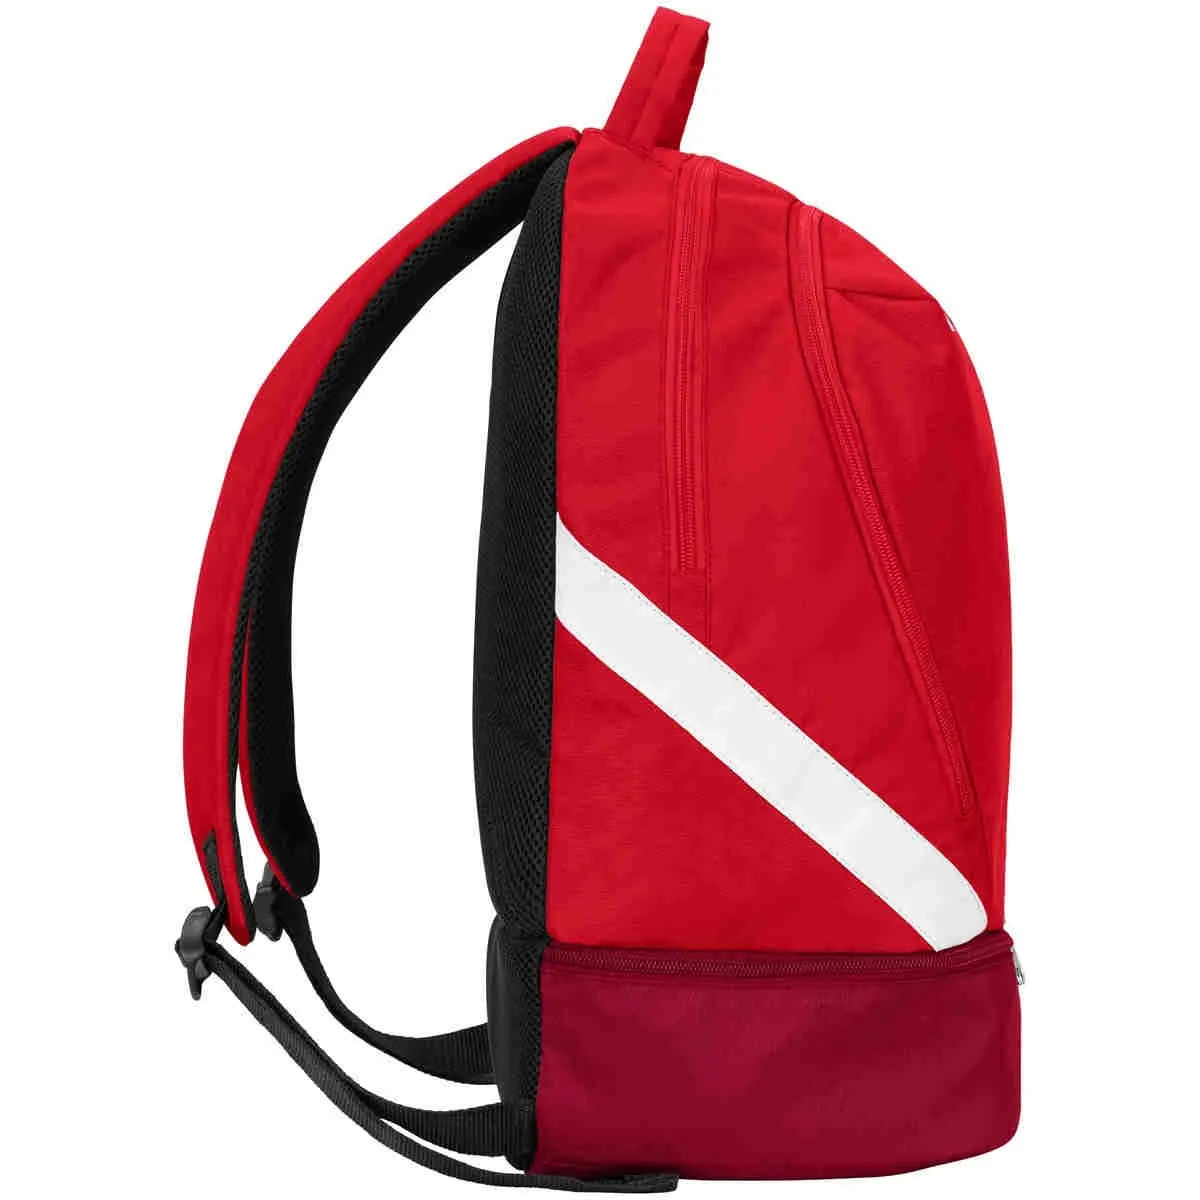 Jako backpack Iconic red/wine red